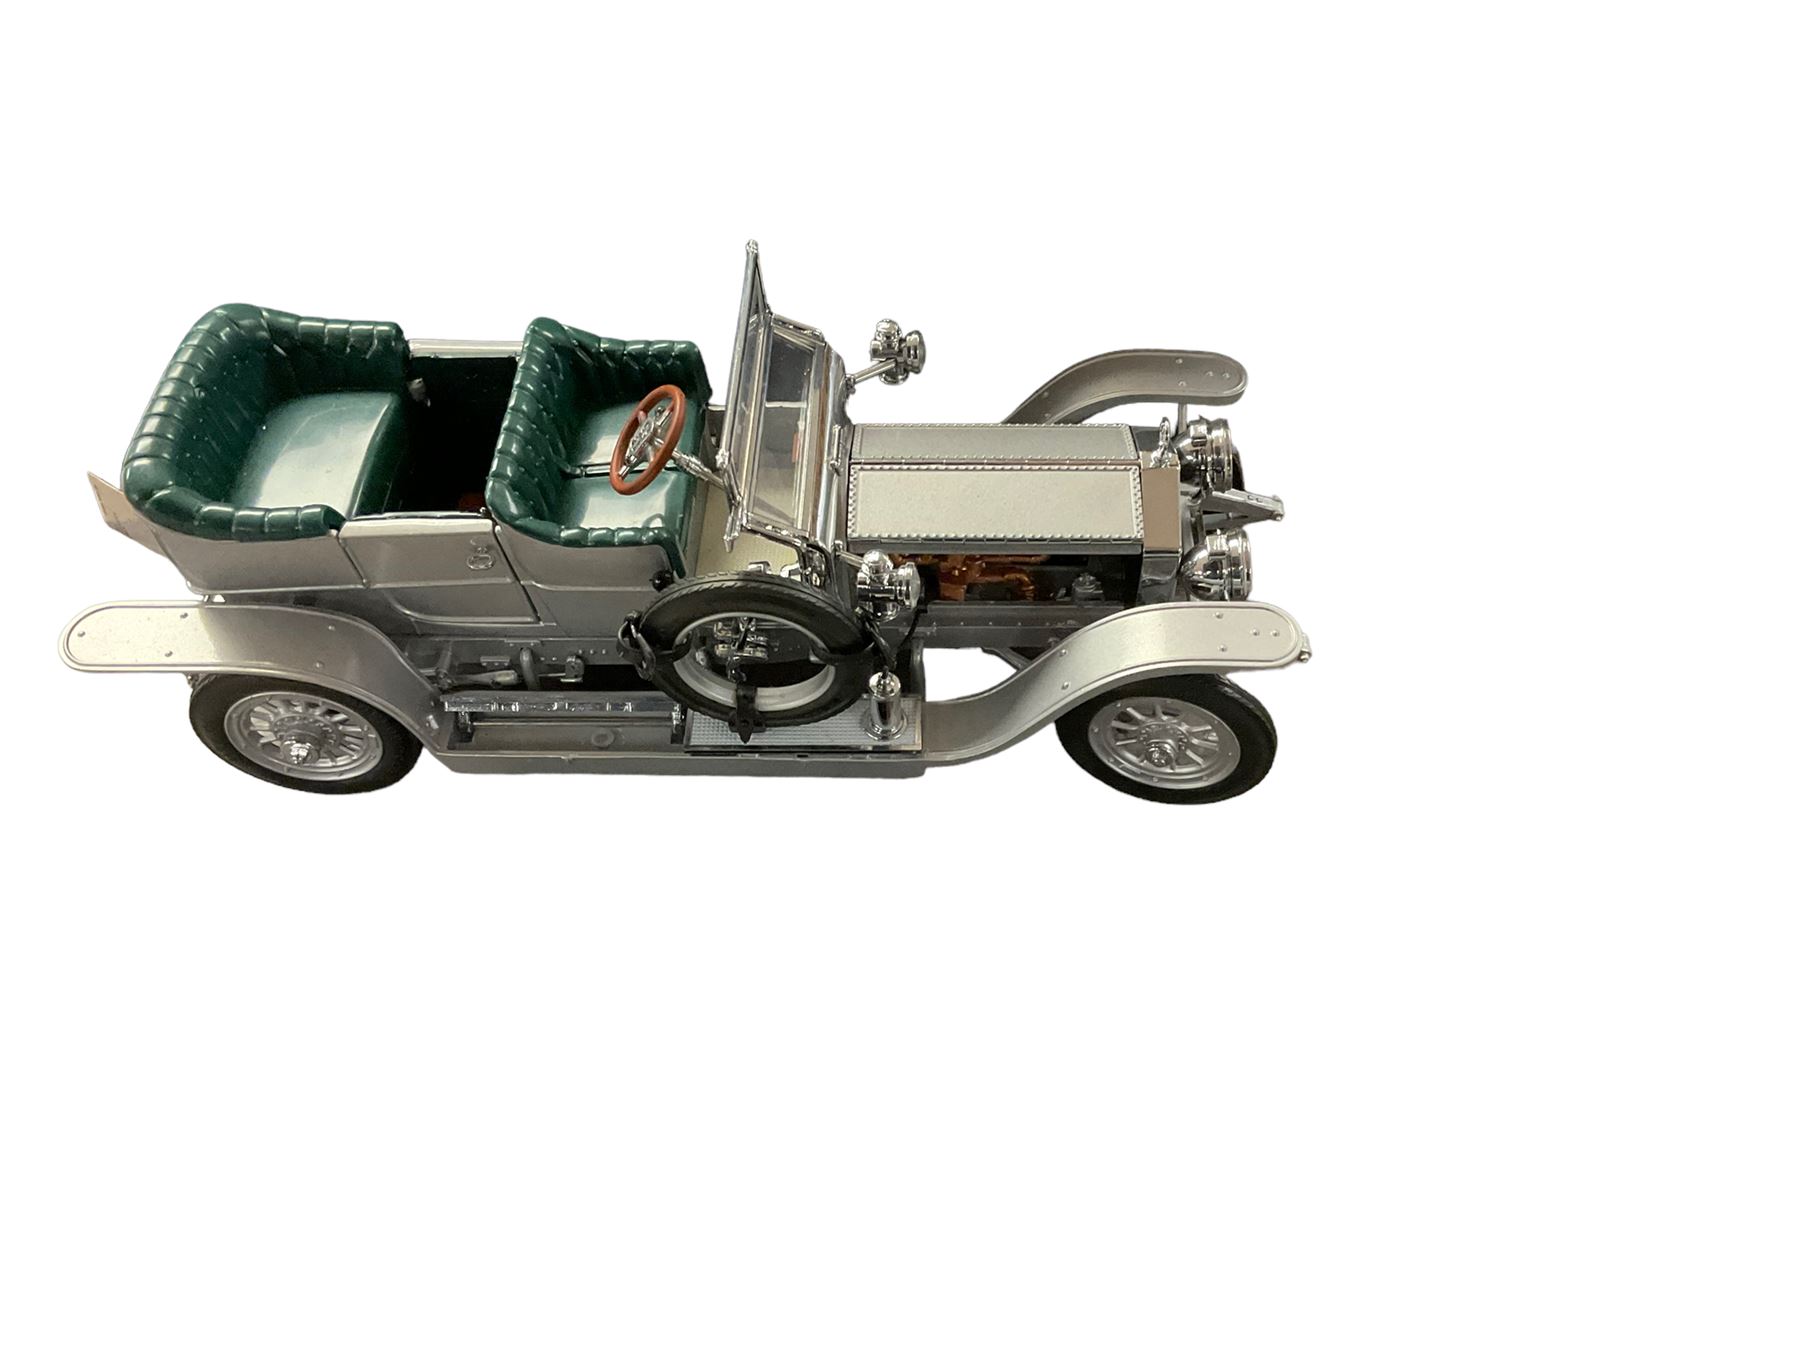 1907 Rolls Royce Silver Ghost cased - Image 5 of 5